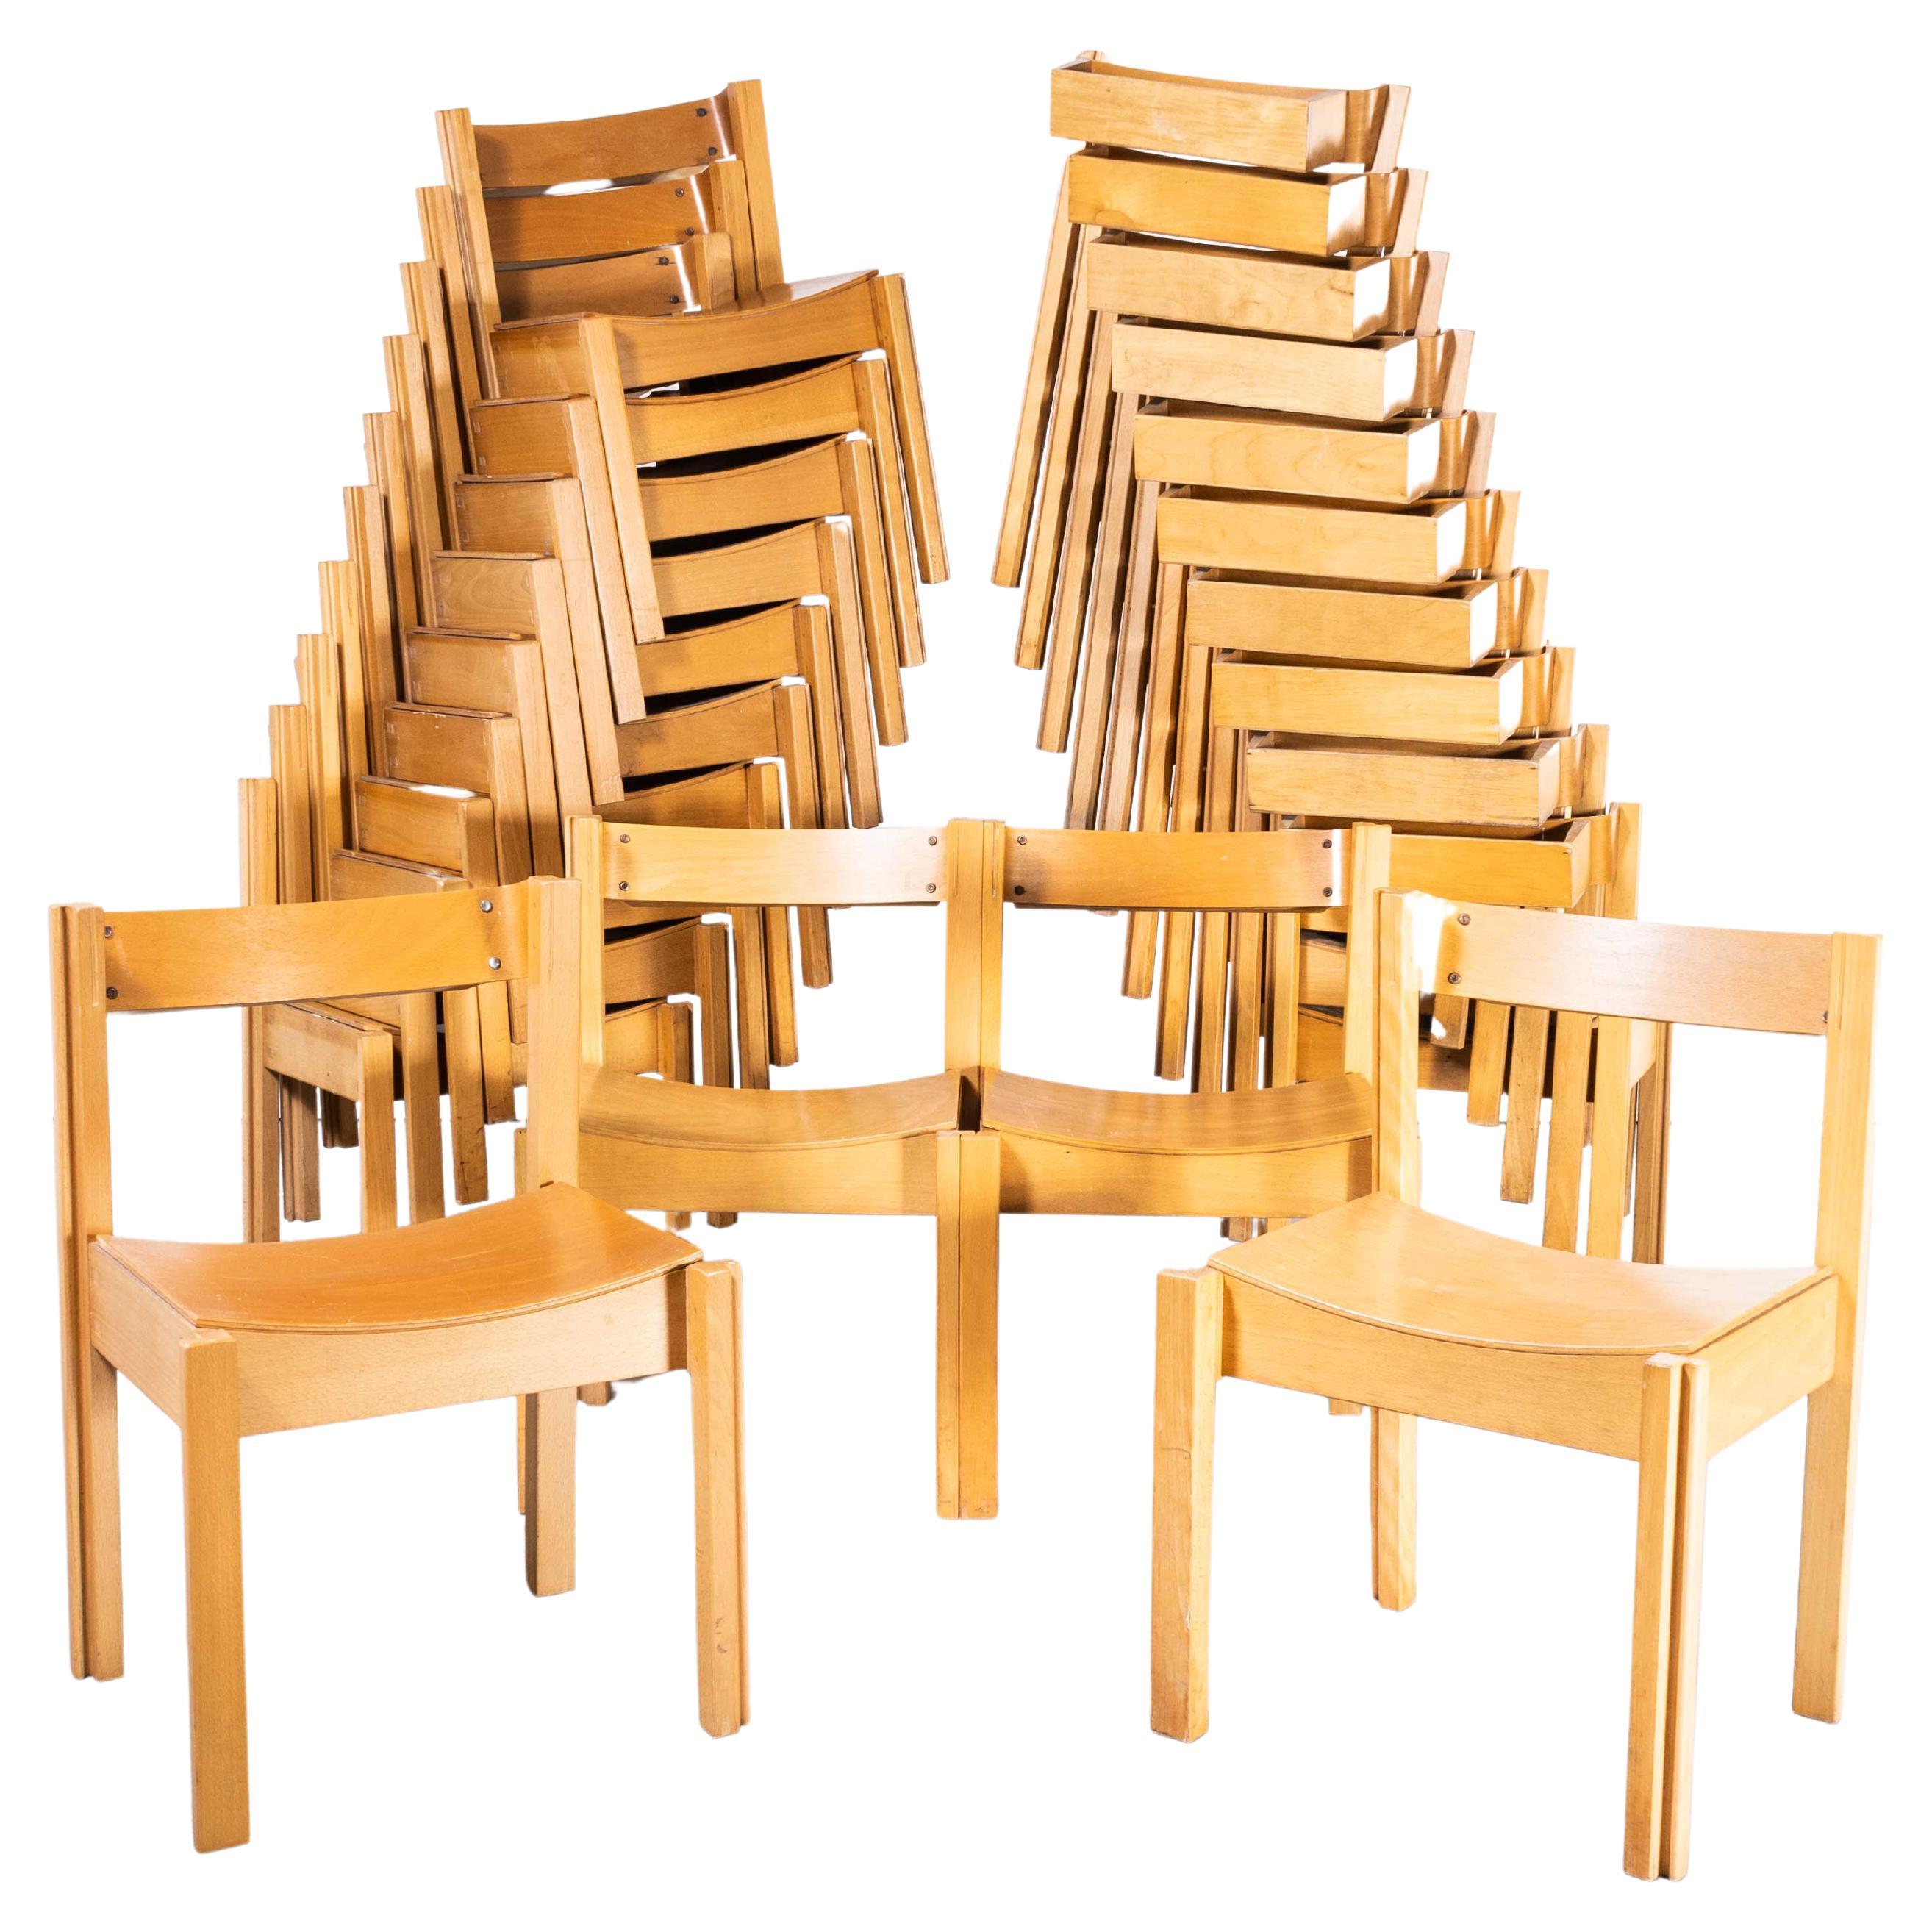 1960’s Linking And Stacking Chairs By Clive Bacon – Last Few Remaining For Sale